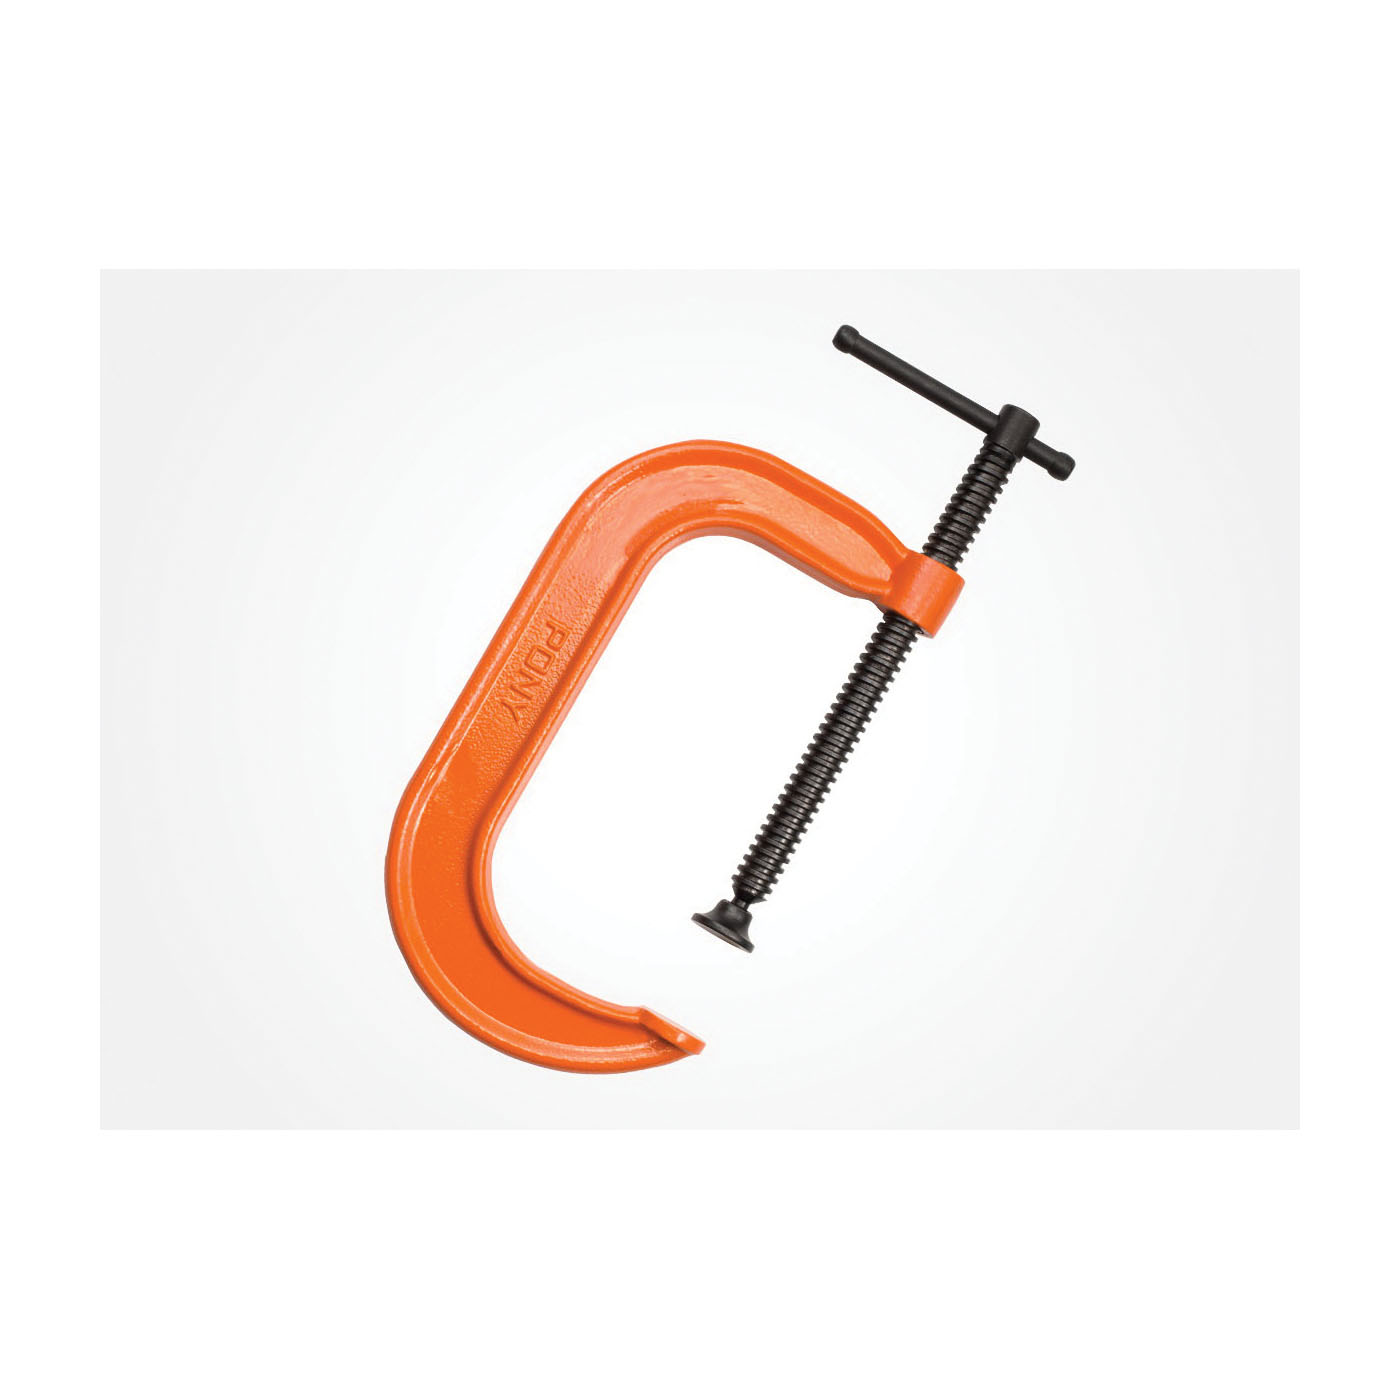 2620 Classic C-Clamp, 400 lb Clamping, 2 in Max Opening Size, 1 in D Throat, Ductile Iron Body, Orange Body